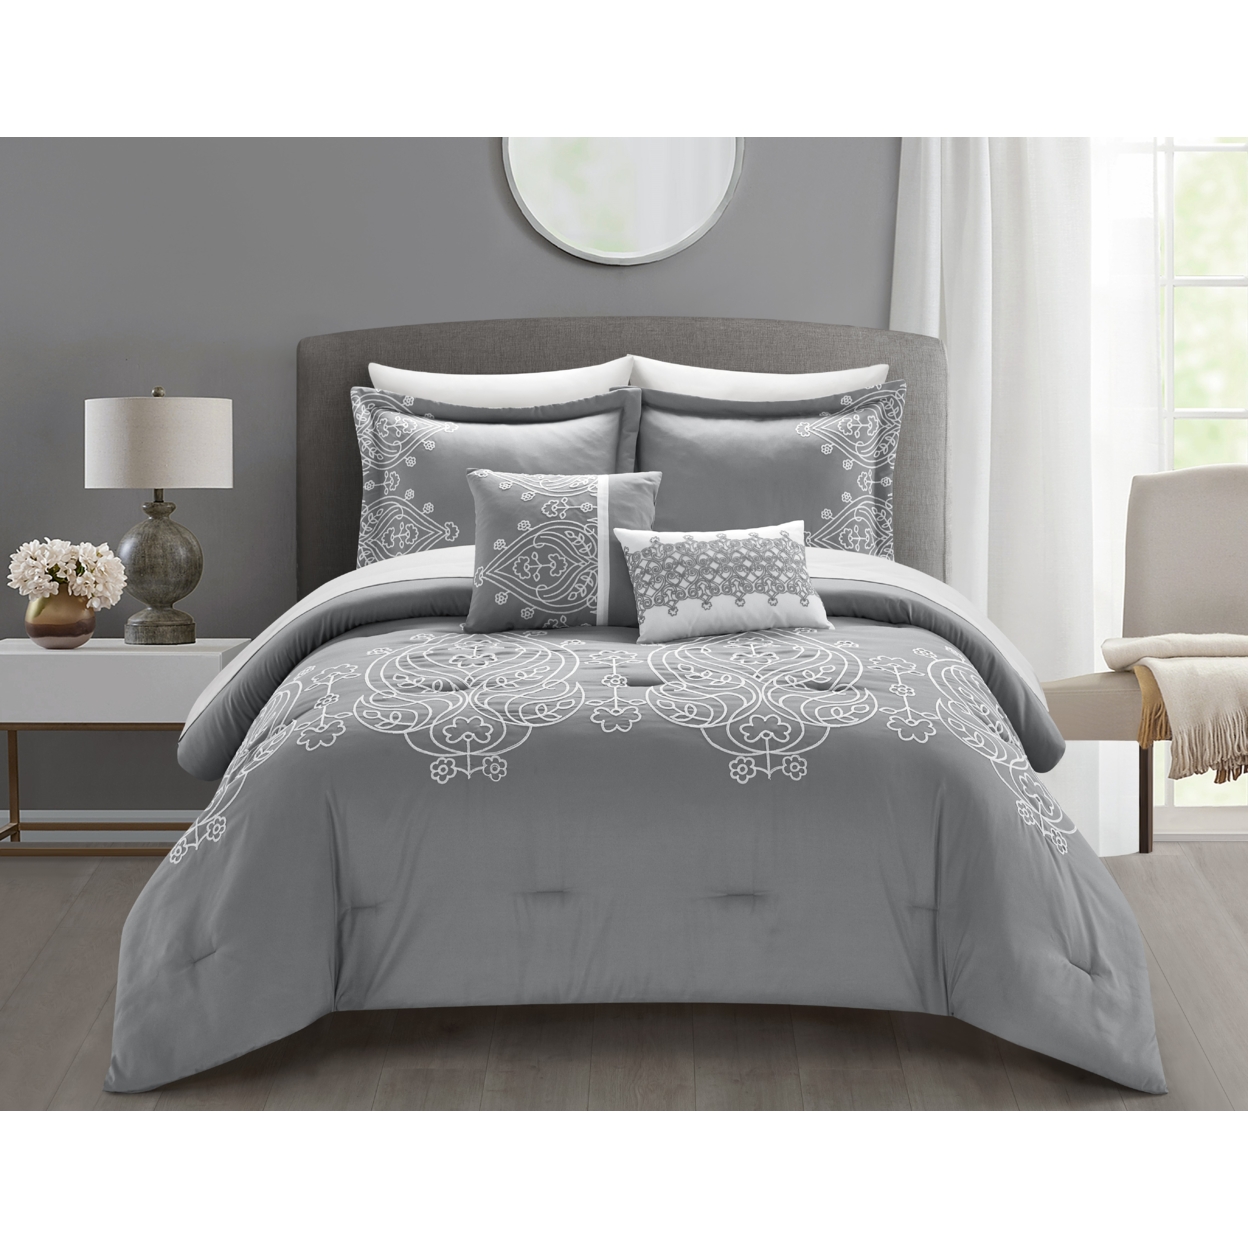 Bibi 5 or 9 Piece Comforter Set Scroll Embroidered Bedding - grey with sheets, queen - 9 piece